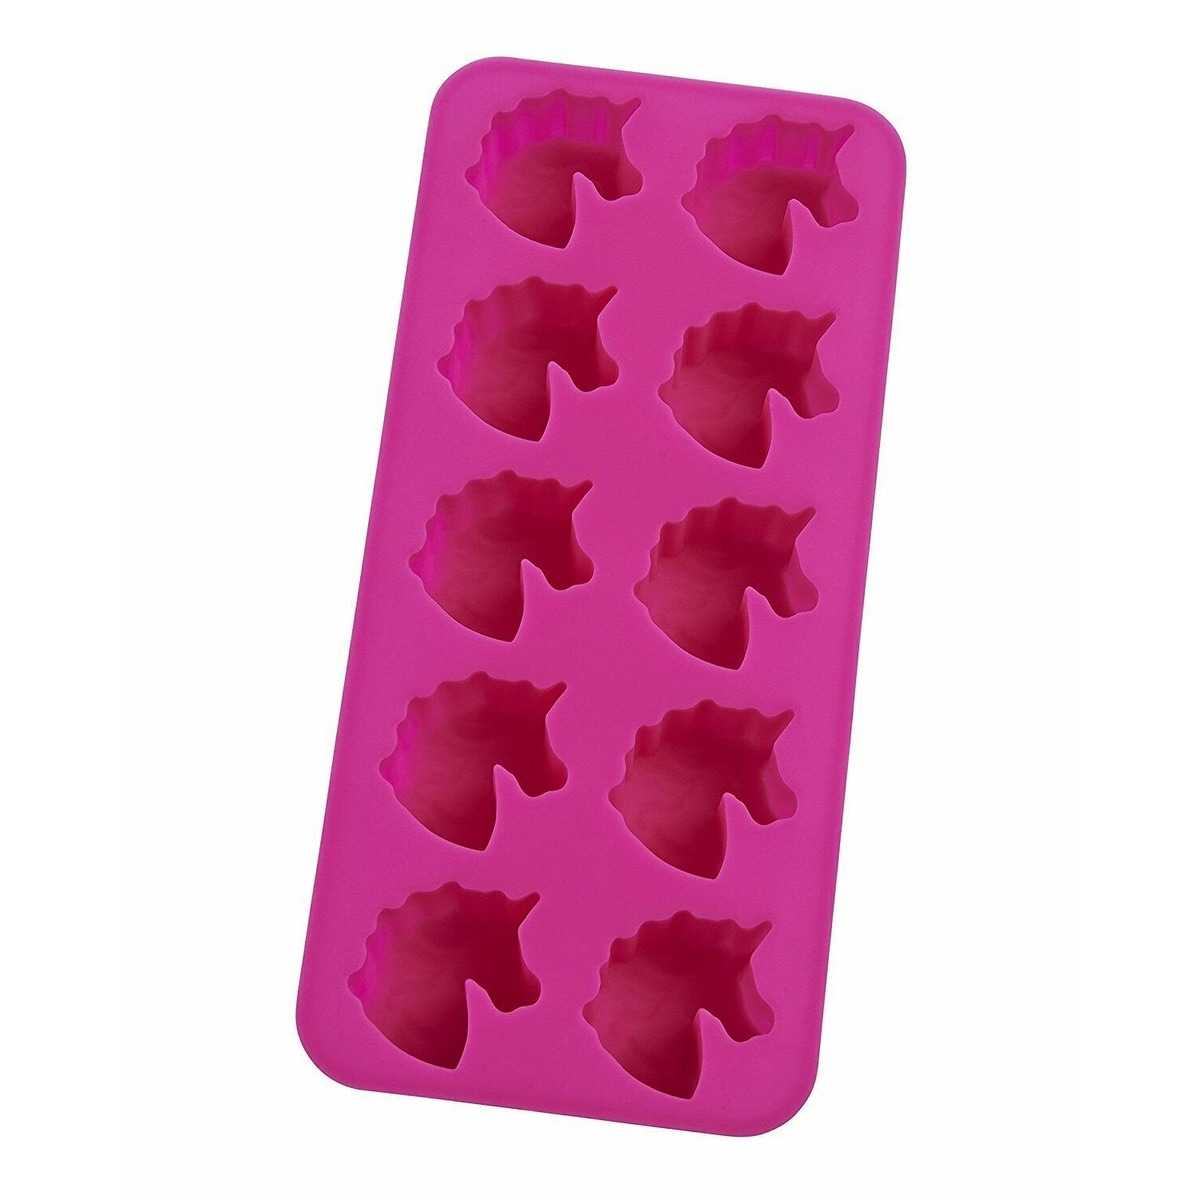 HIC Red Silicone Big Block Ice Cube Tray and Baking Mold - Makes 8  Oversized Cubes